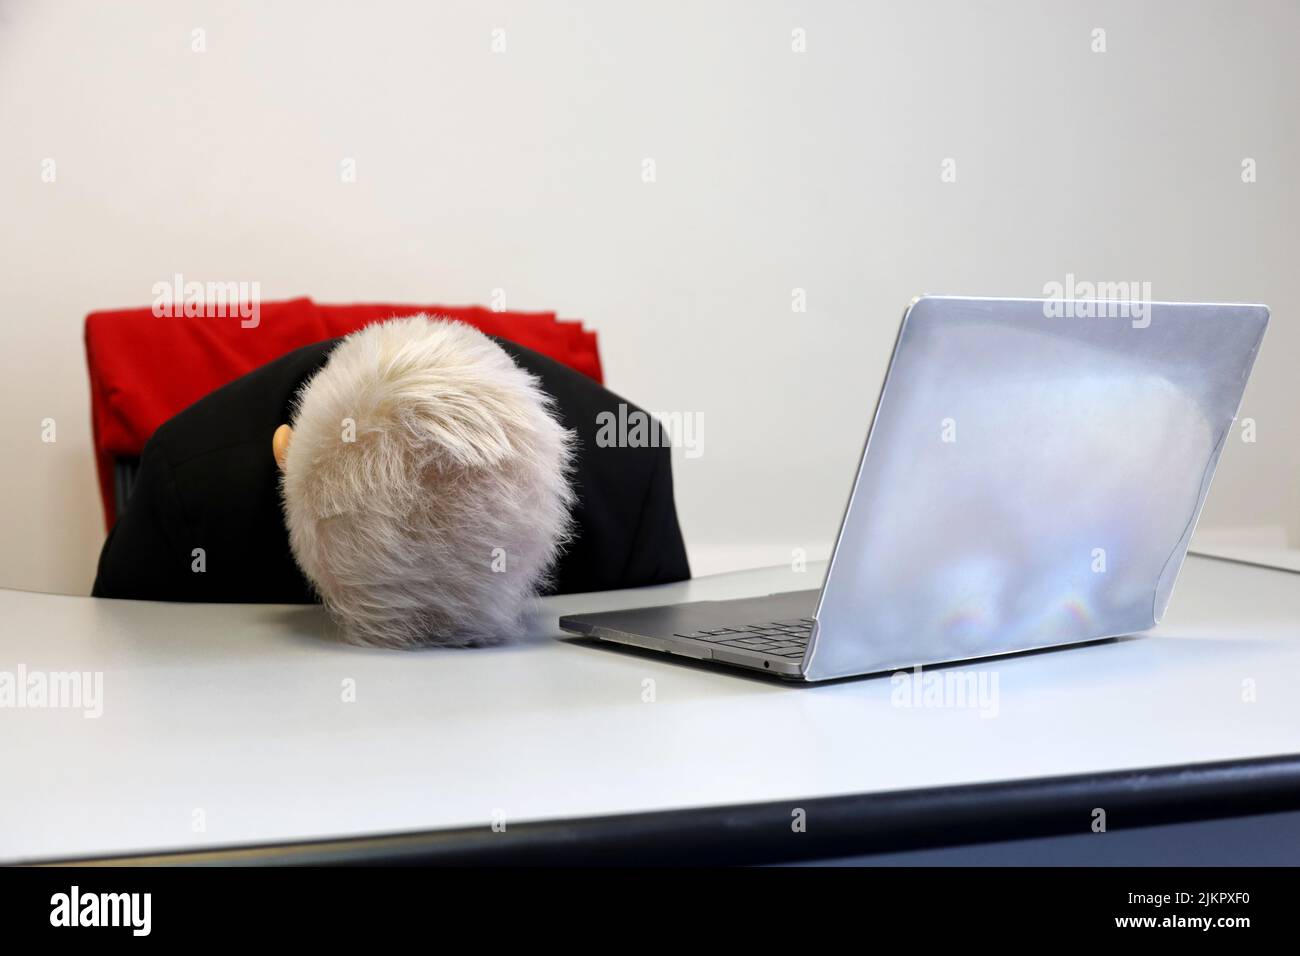 Woman with short dyed hair sleeping near the laptop at office table. Concept of overworked employee, tired after work, lazy day Stock Photo